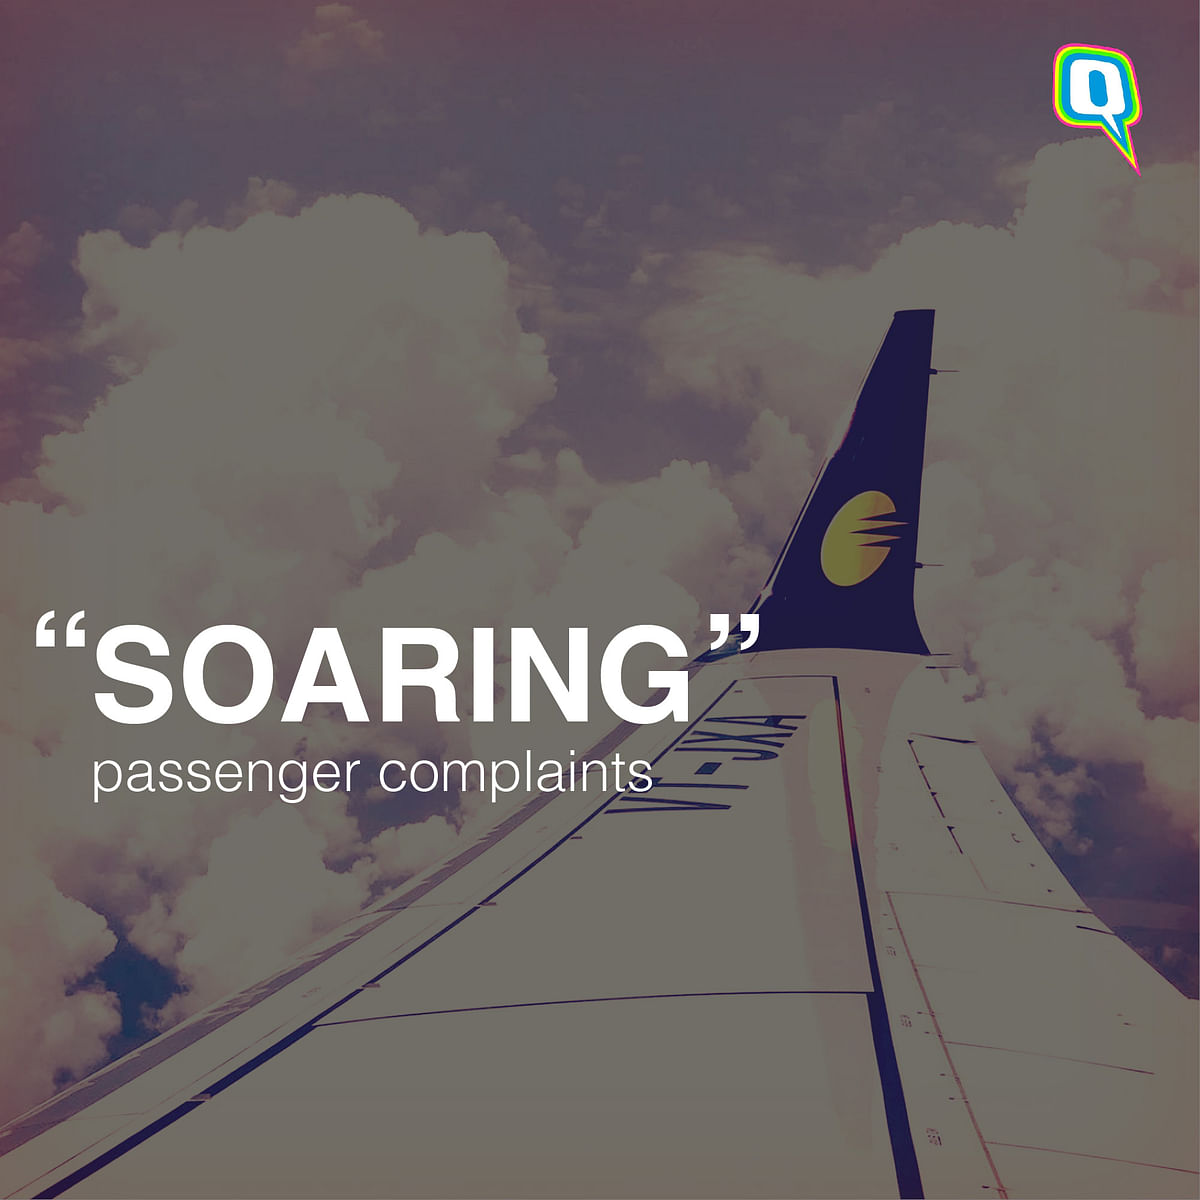 Pilots ‘ rerouting’ their careers and other apt aviation puns best describe the Jet Airways saga.  